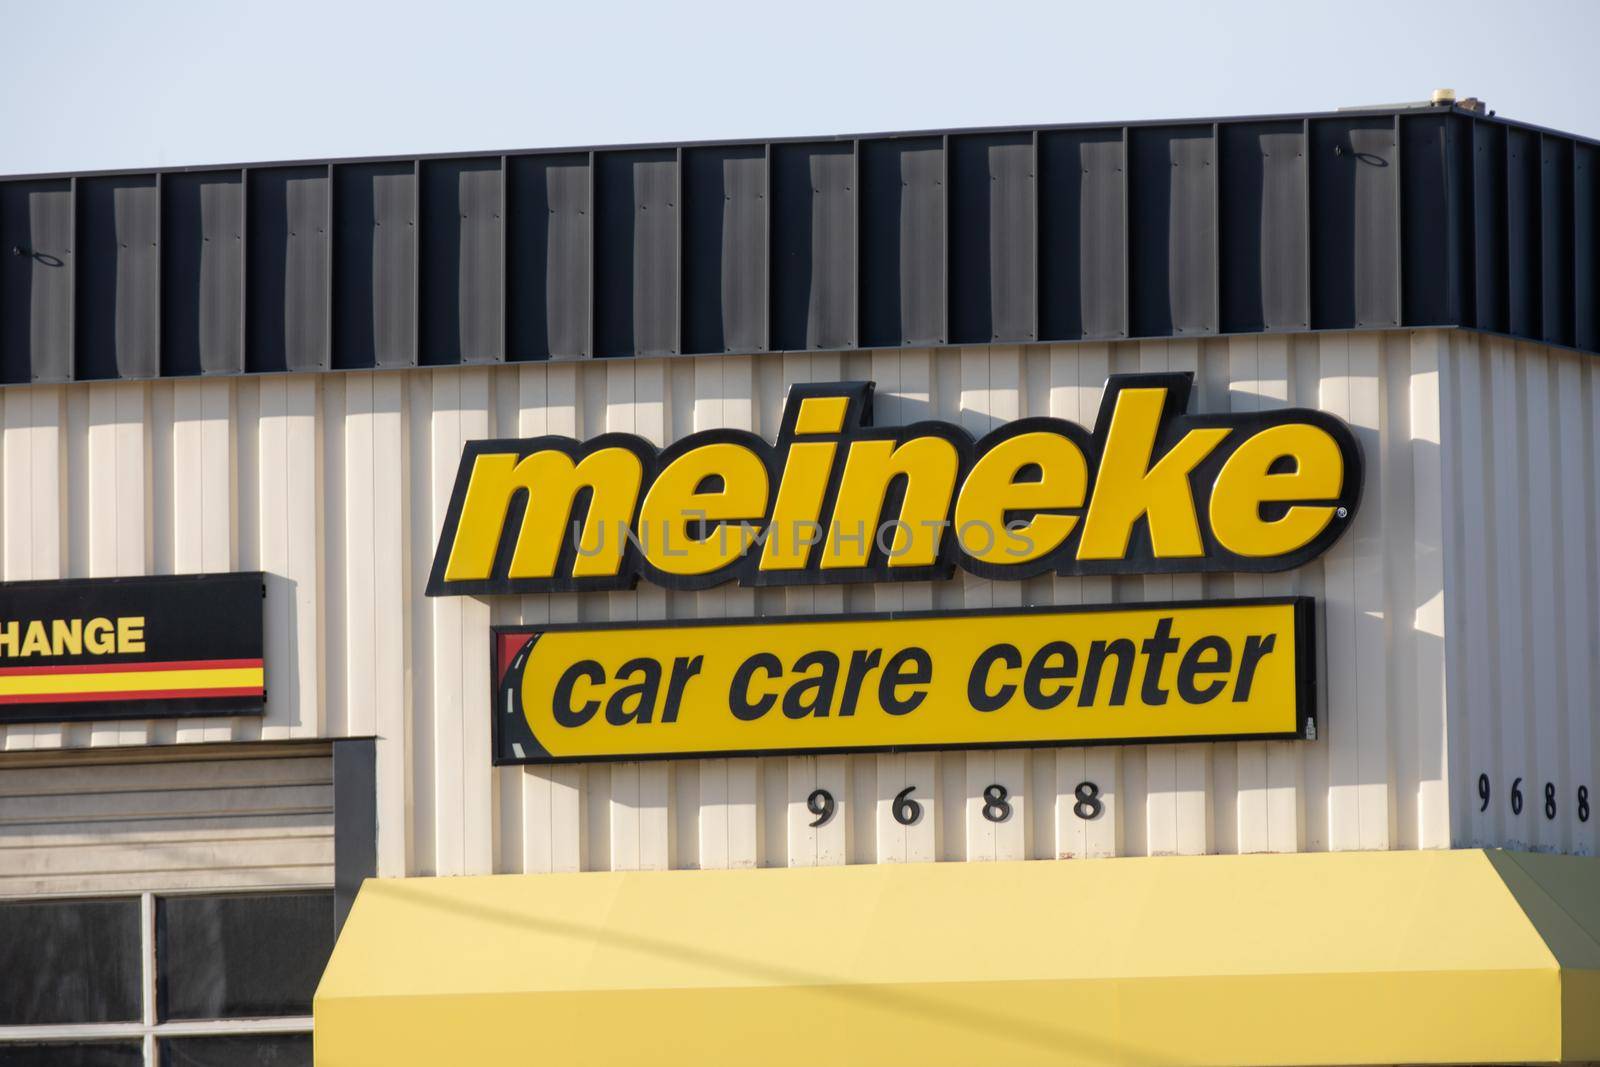 BOISE, IDAHO - MARCH 21, 2021: Sign for the Meineke car care center located in Boise, Idaho